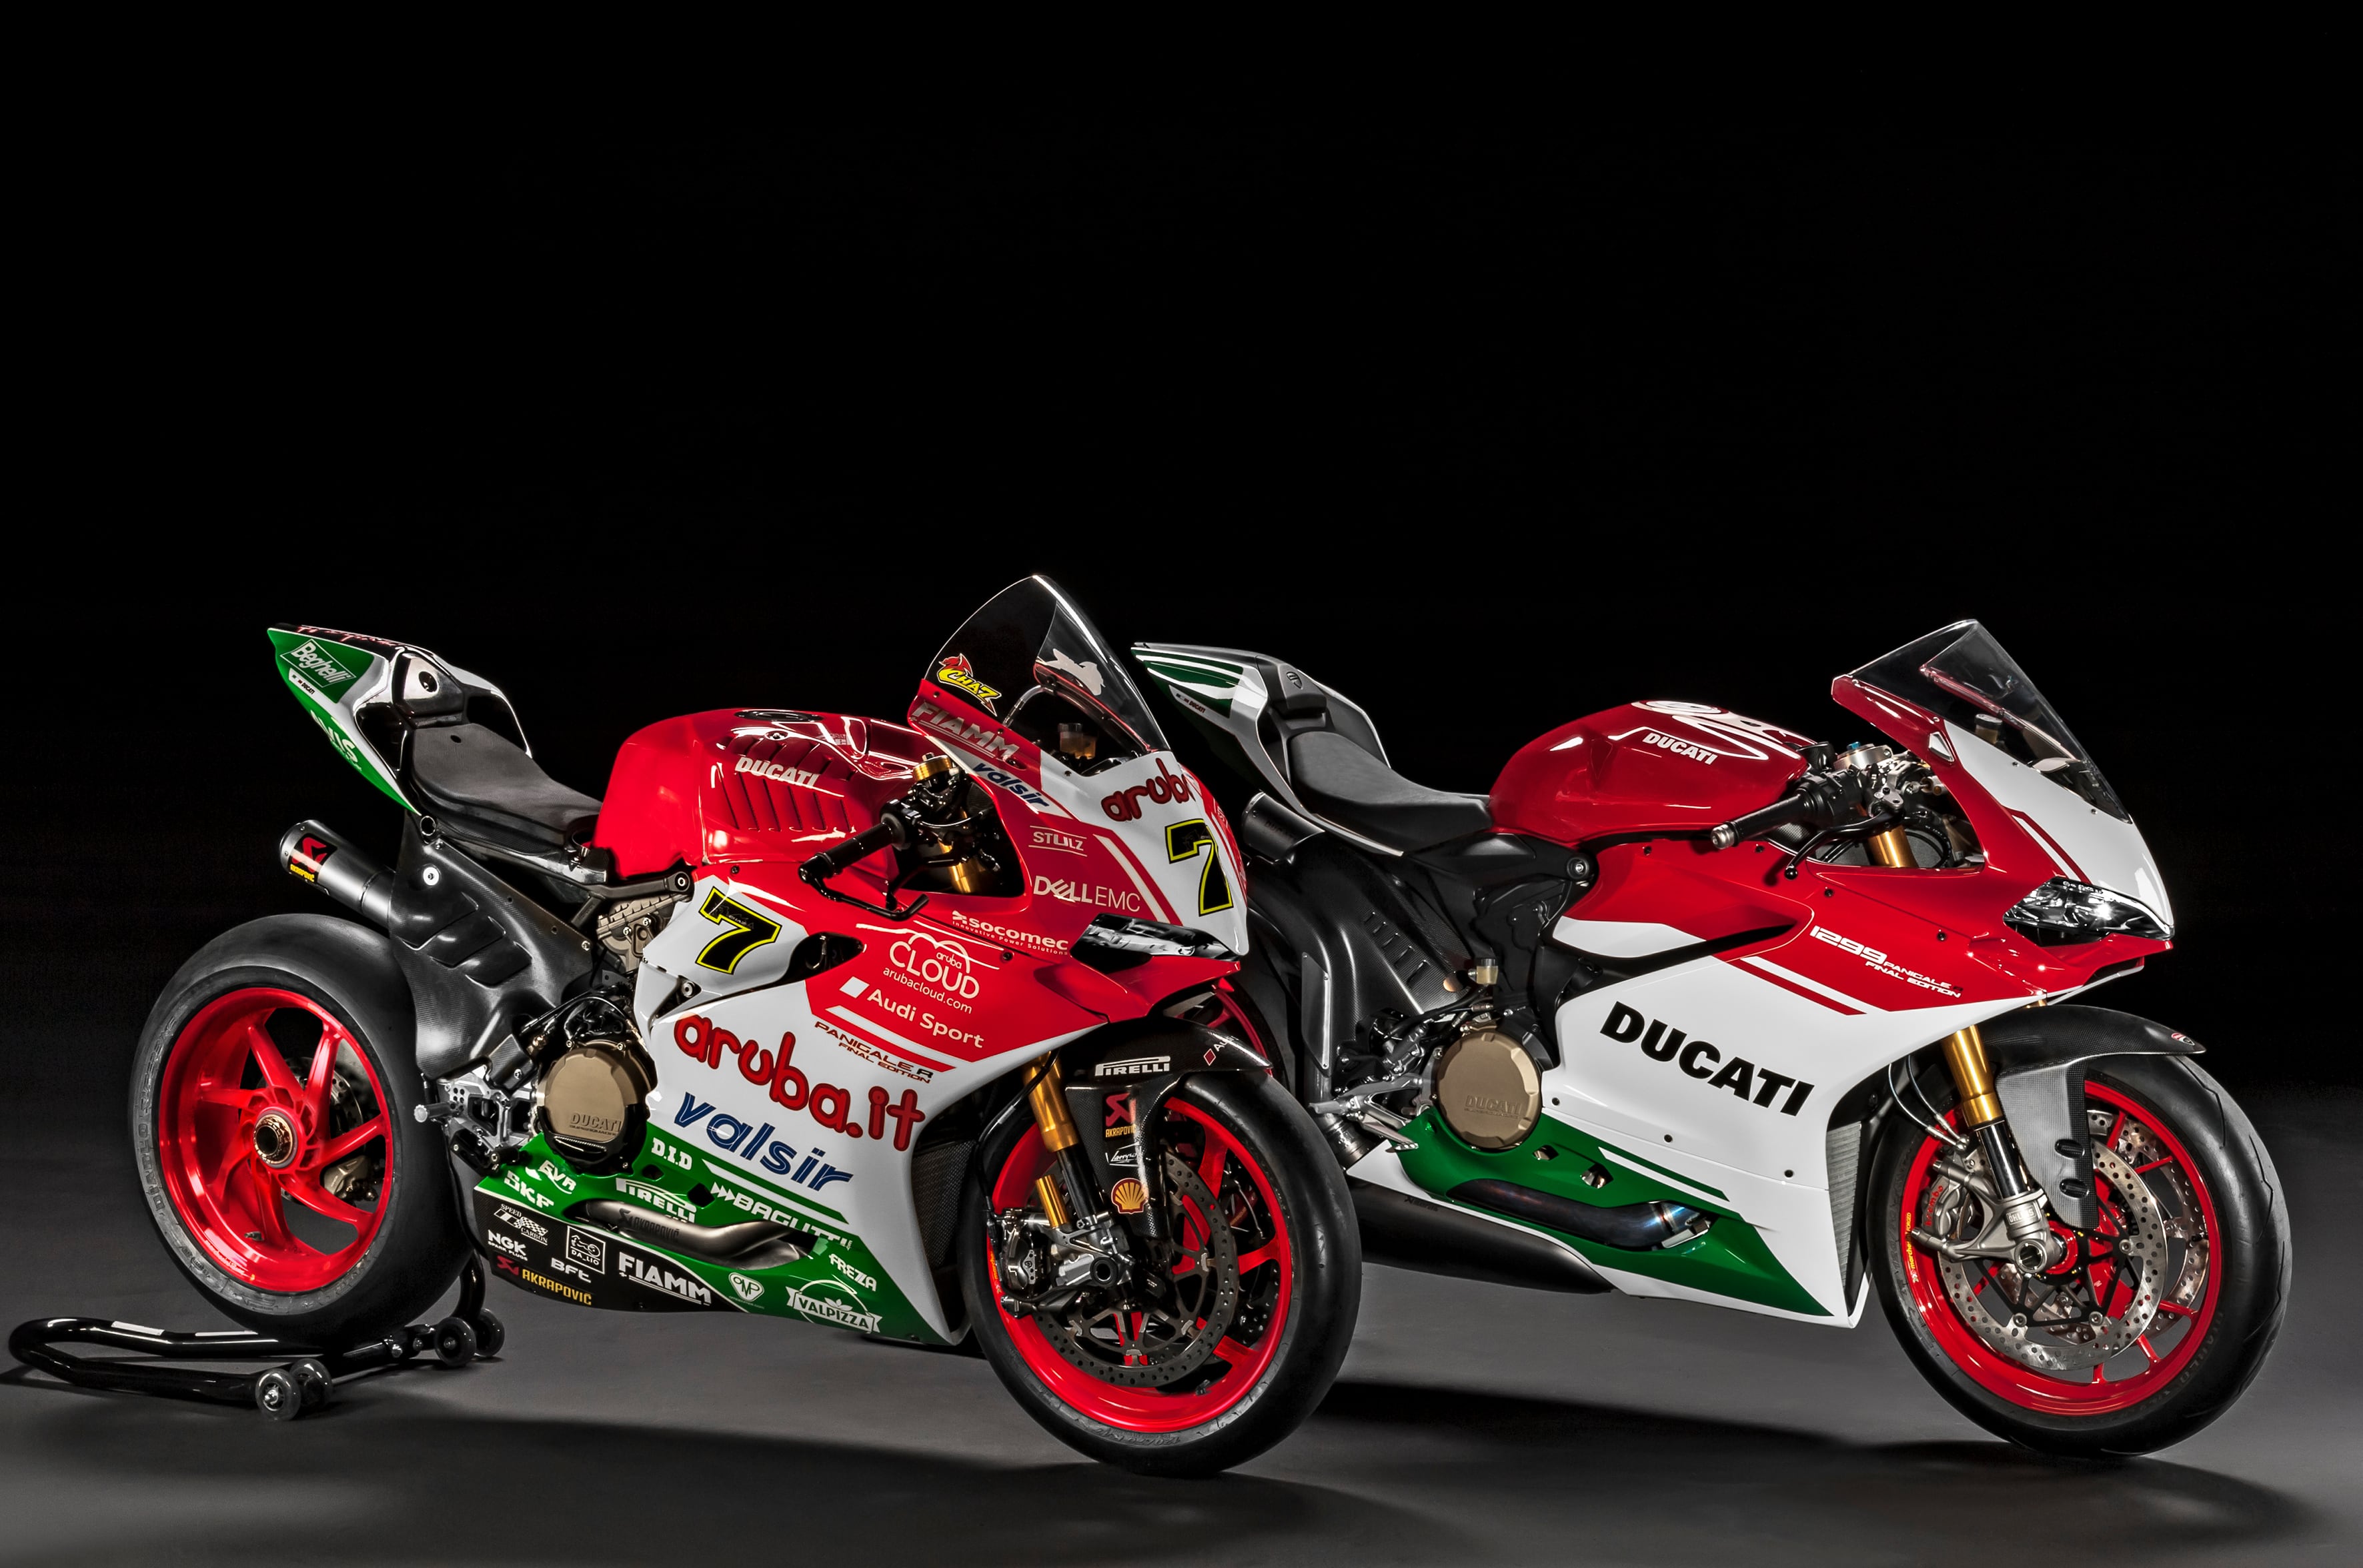 The 1299 Panigale Final Edition.